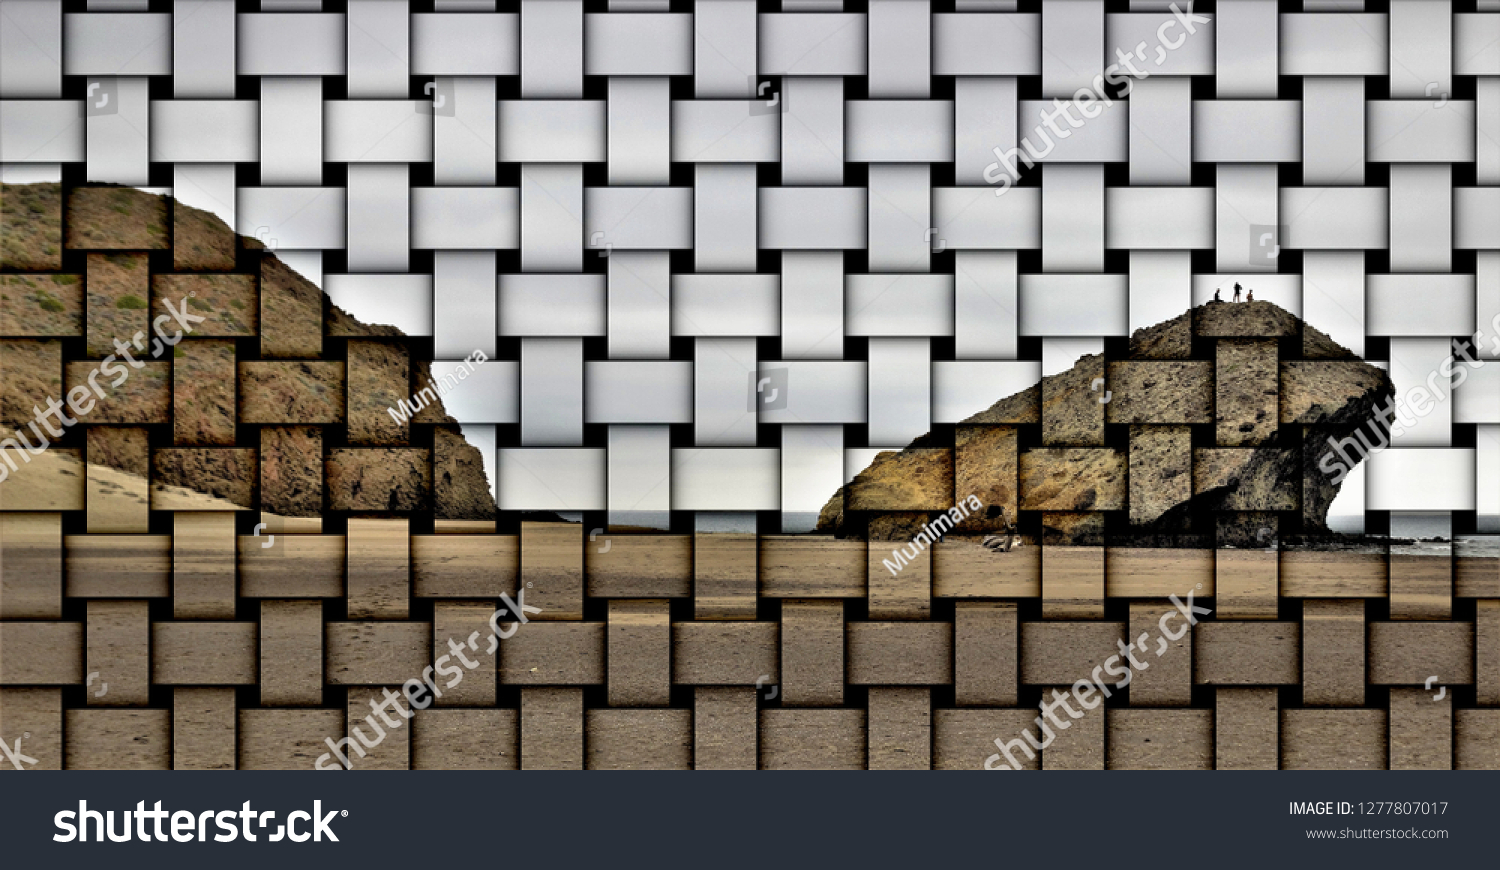 abstract cubist three-dimensional effects of indiana Jones movie stage and the last crusade, tongues of lava eroded by the sea, the auto clastic gaps or pyroclastic andesite, The petrified wave, beach #1277807017